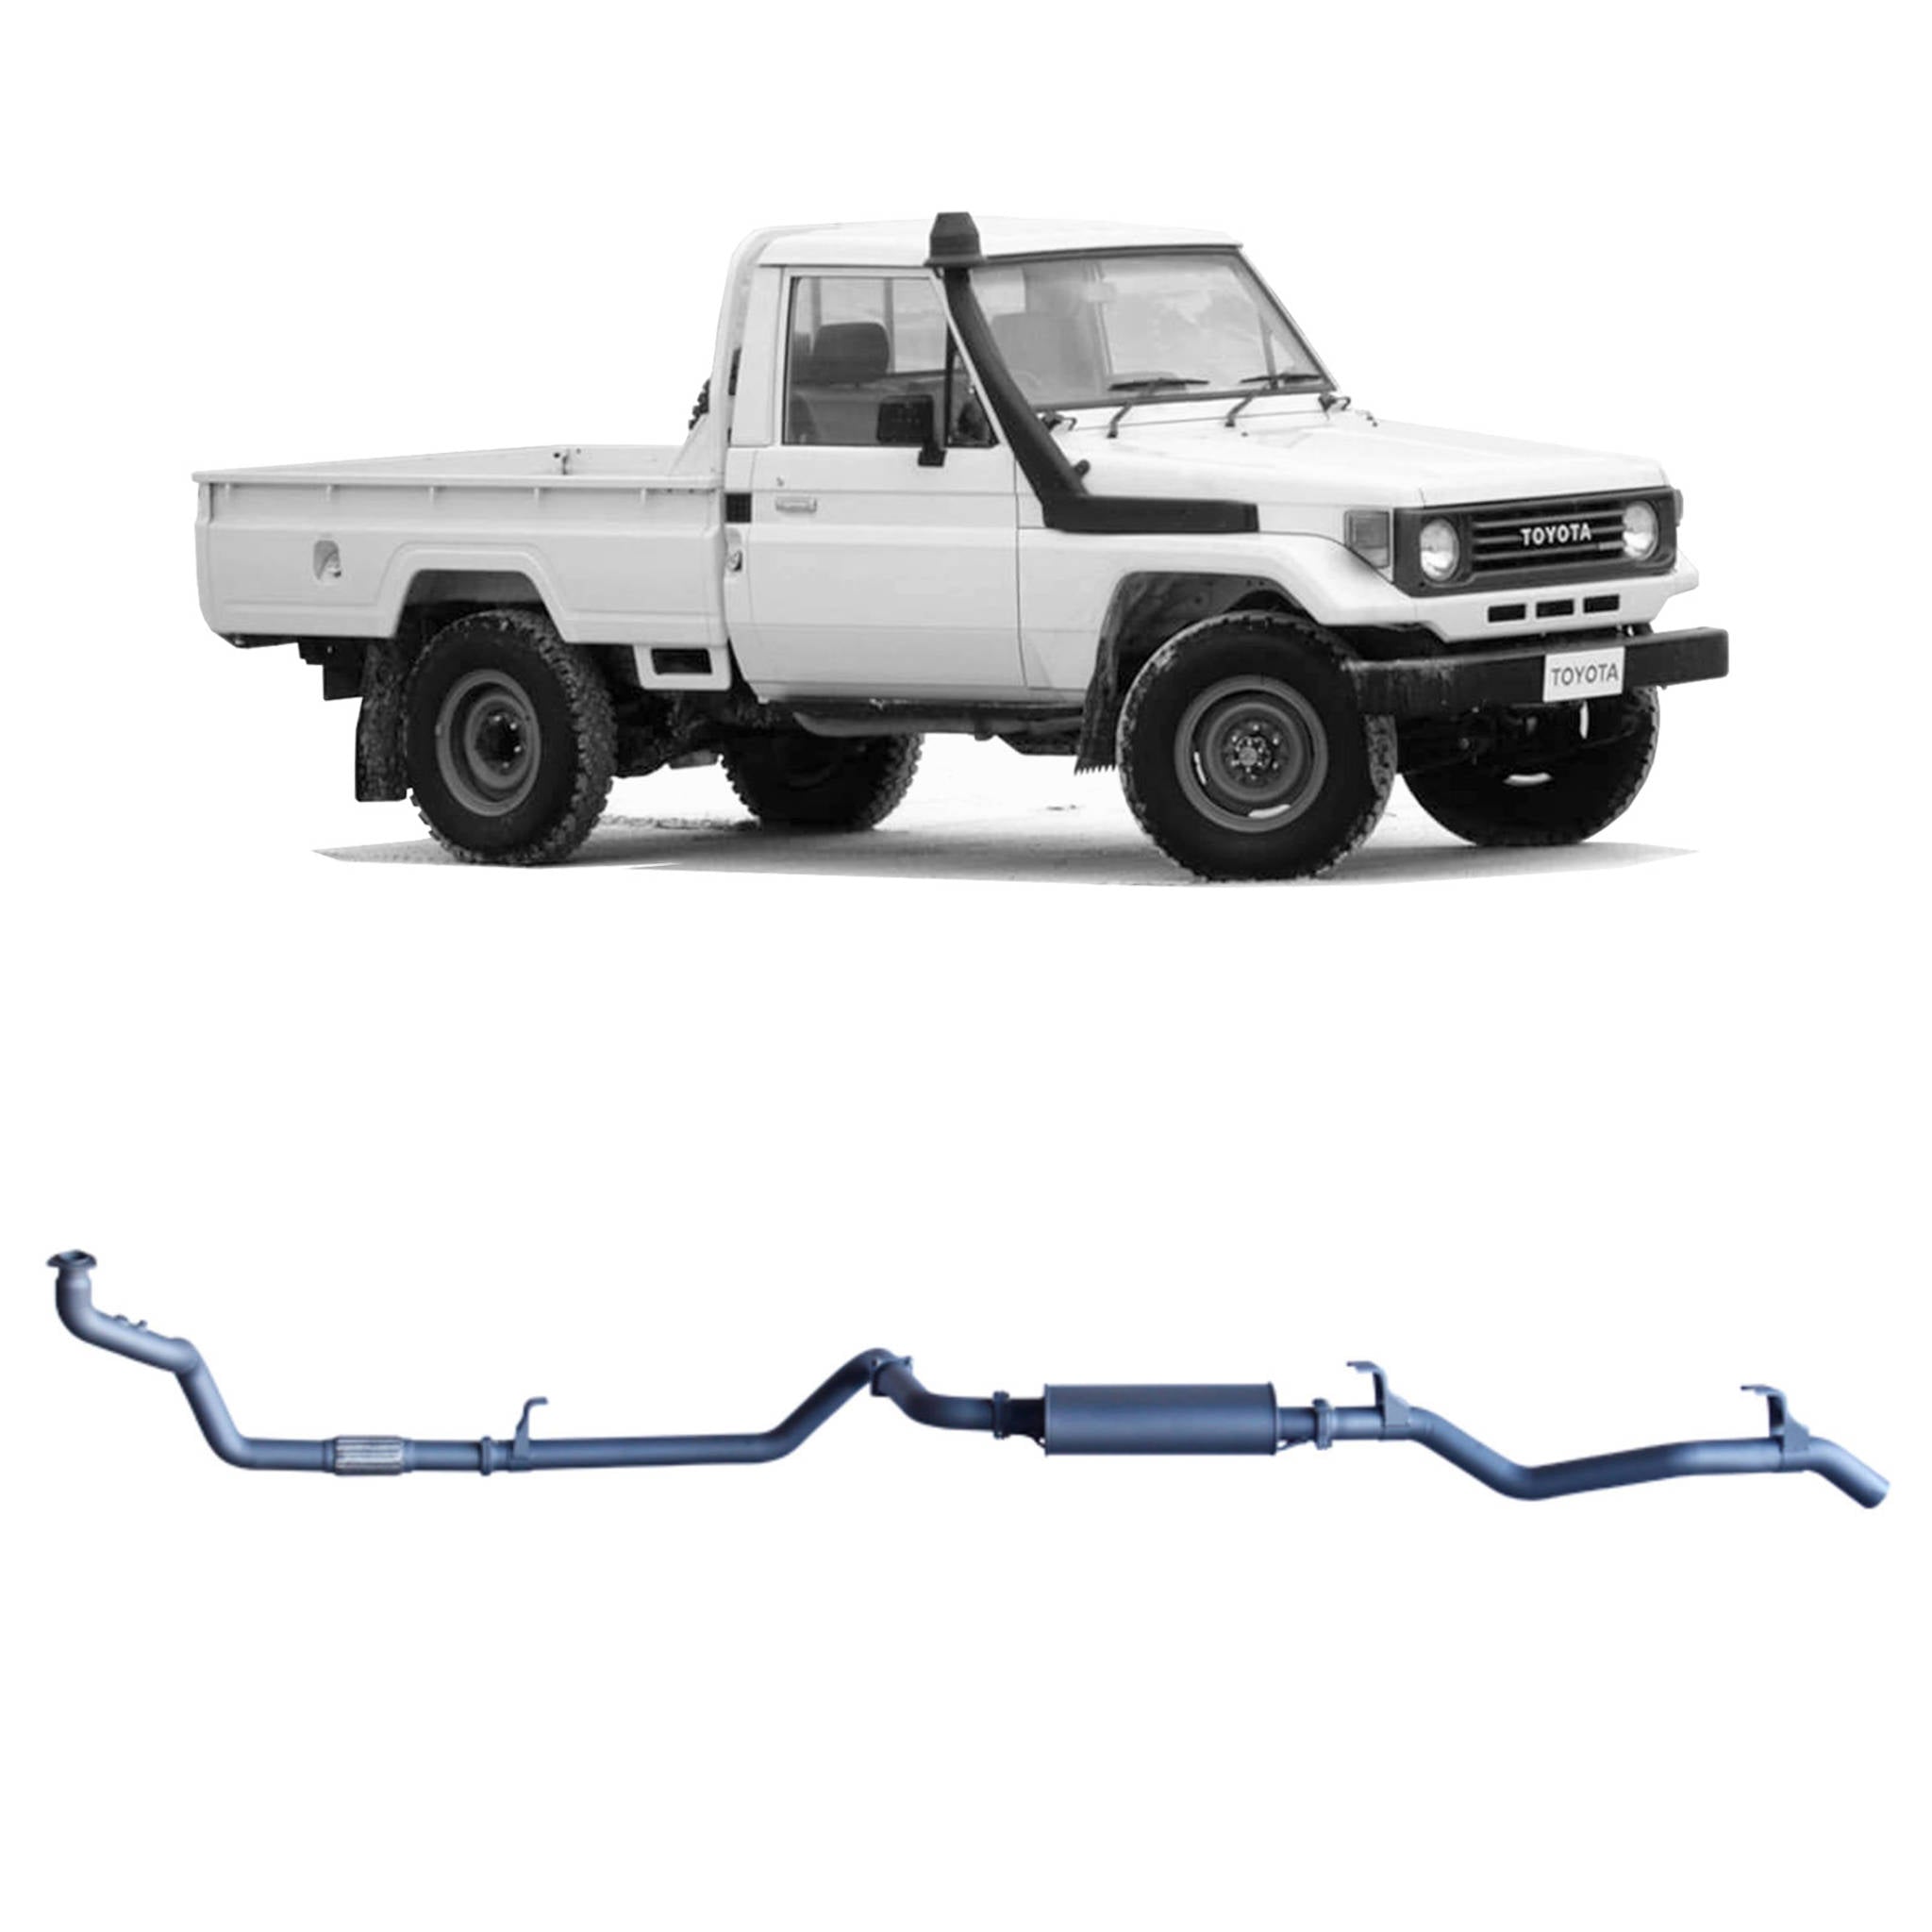 Redback Extreme Duty Exhaust to suit Toyota Landcruiser 78 Series (01/1990 - 01/2007), Toyota Landcruiser 75 Series (03/1990 - 11/1999)